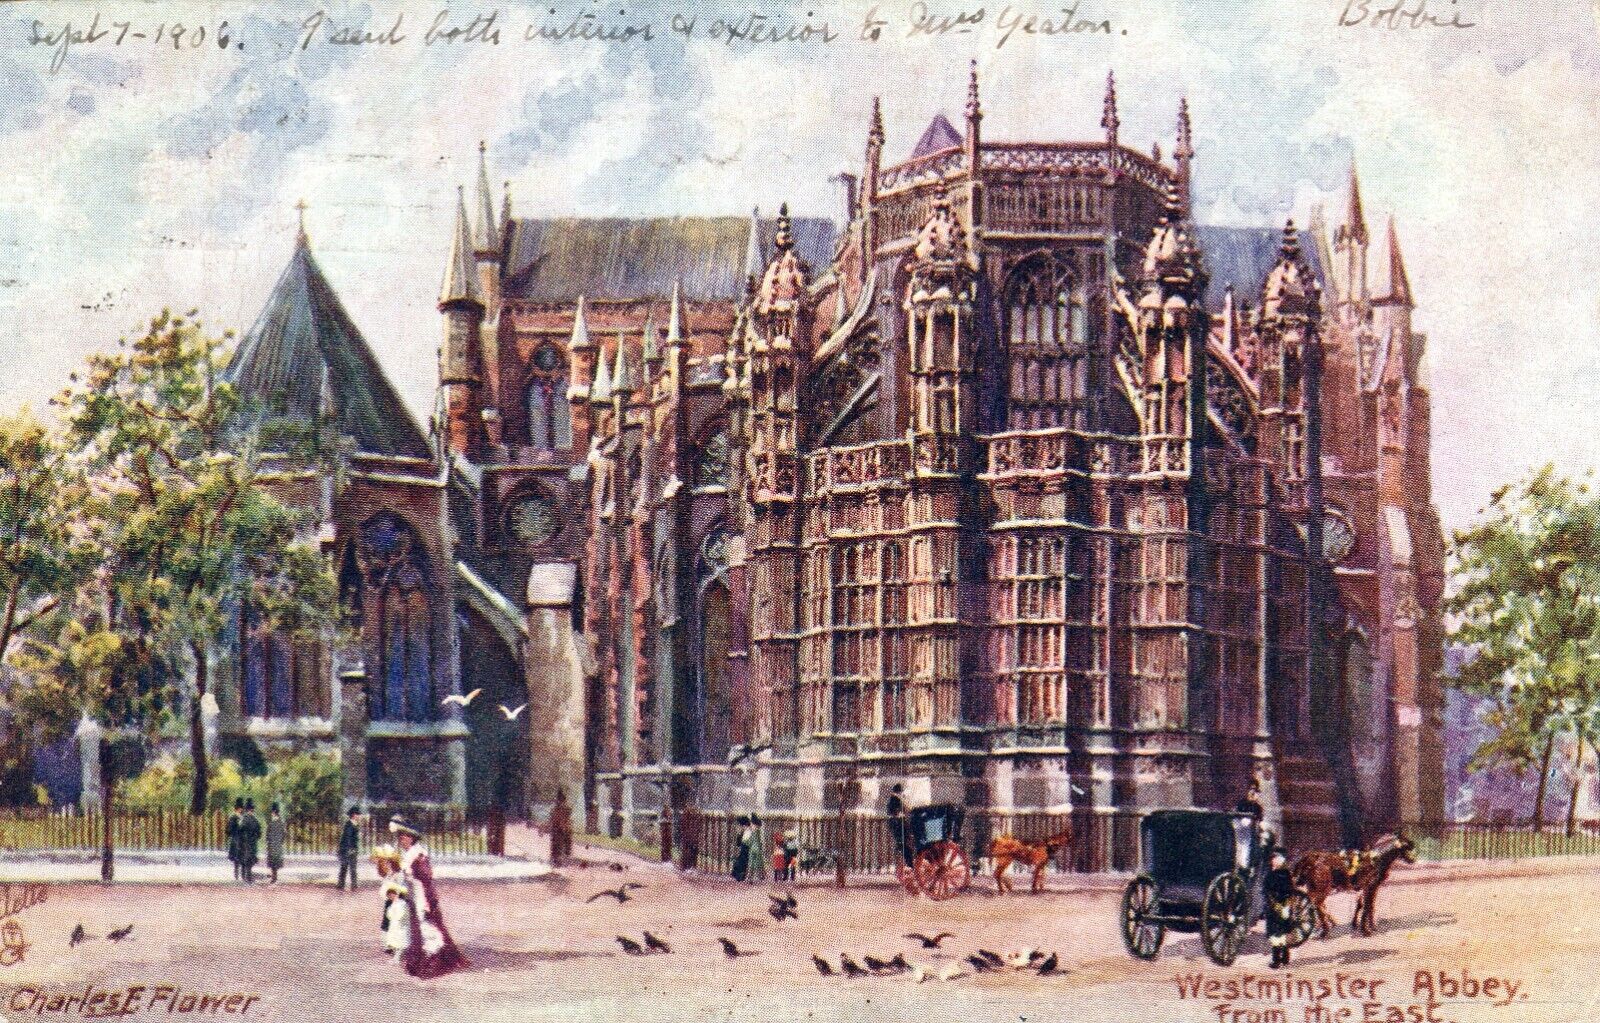 Tuck\'s Art OILETTE Series. Posted in 1906 Postcard #7033. Westminster Abbey